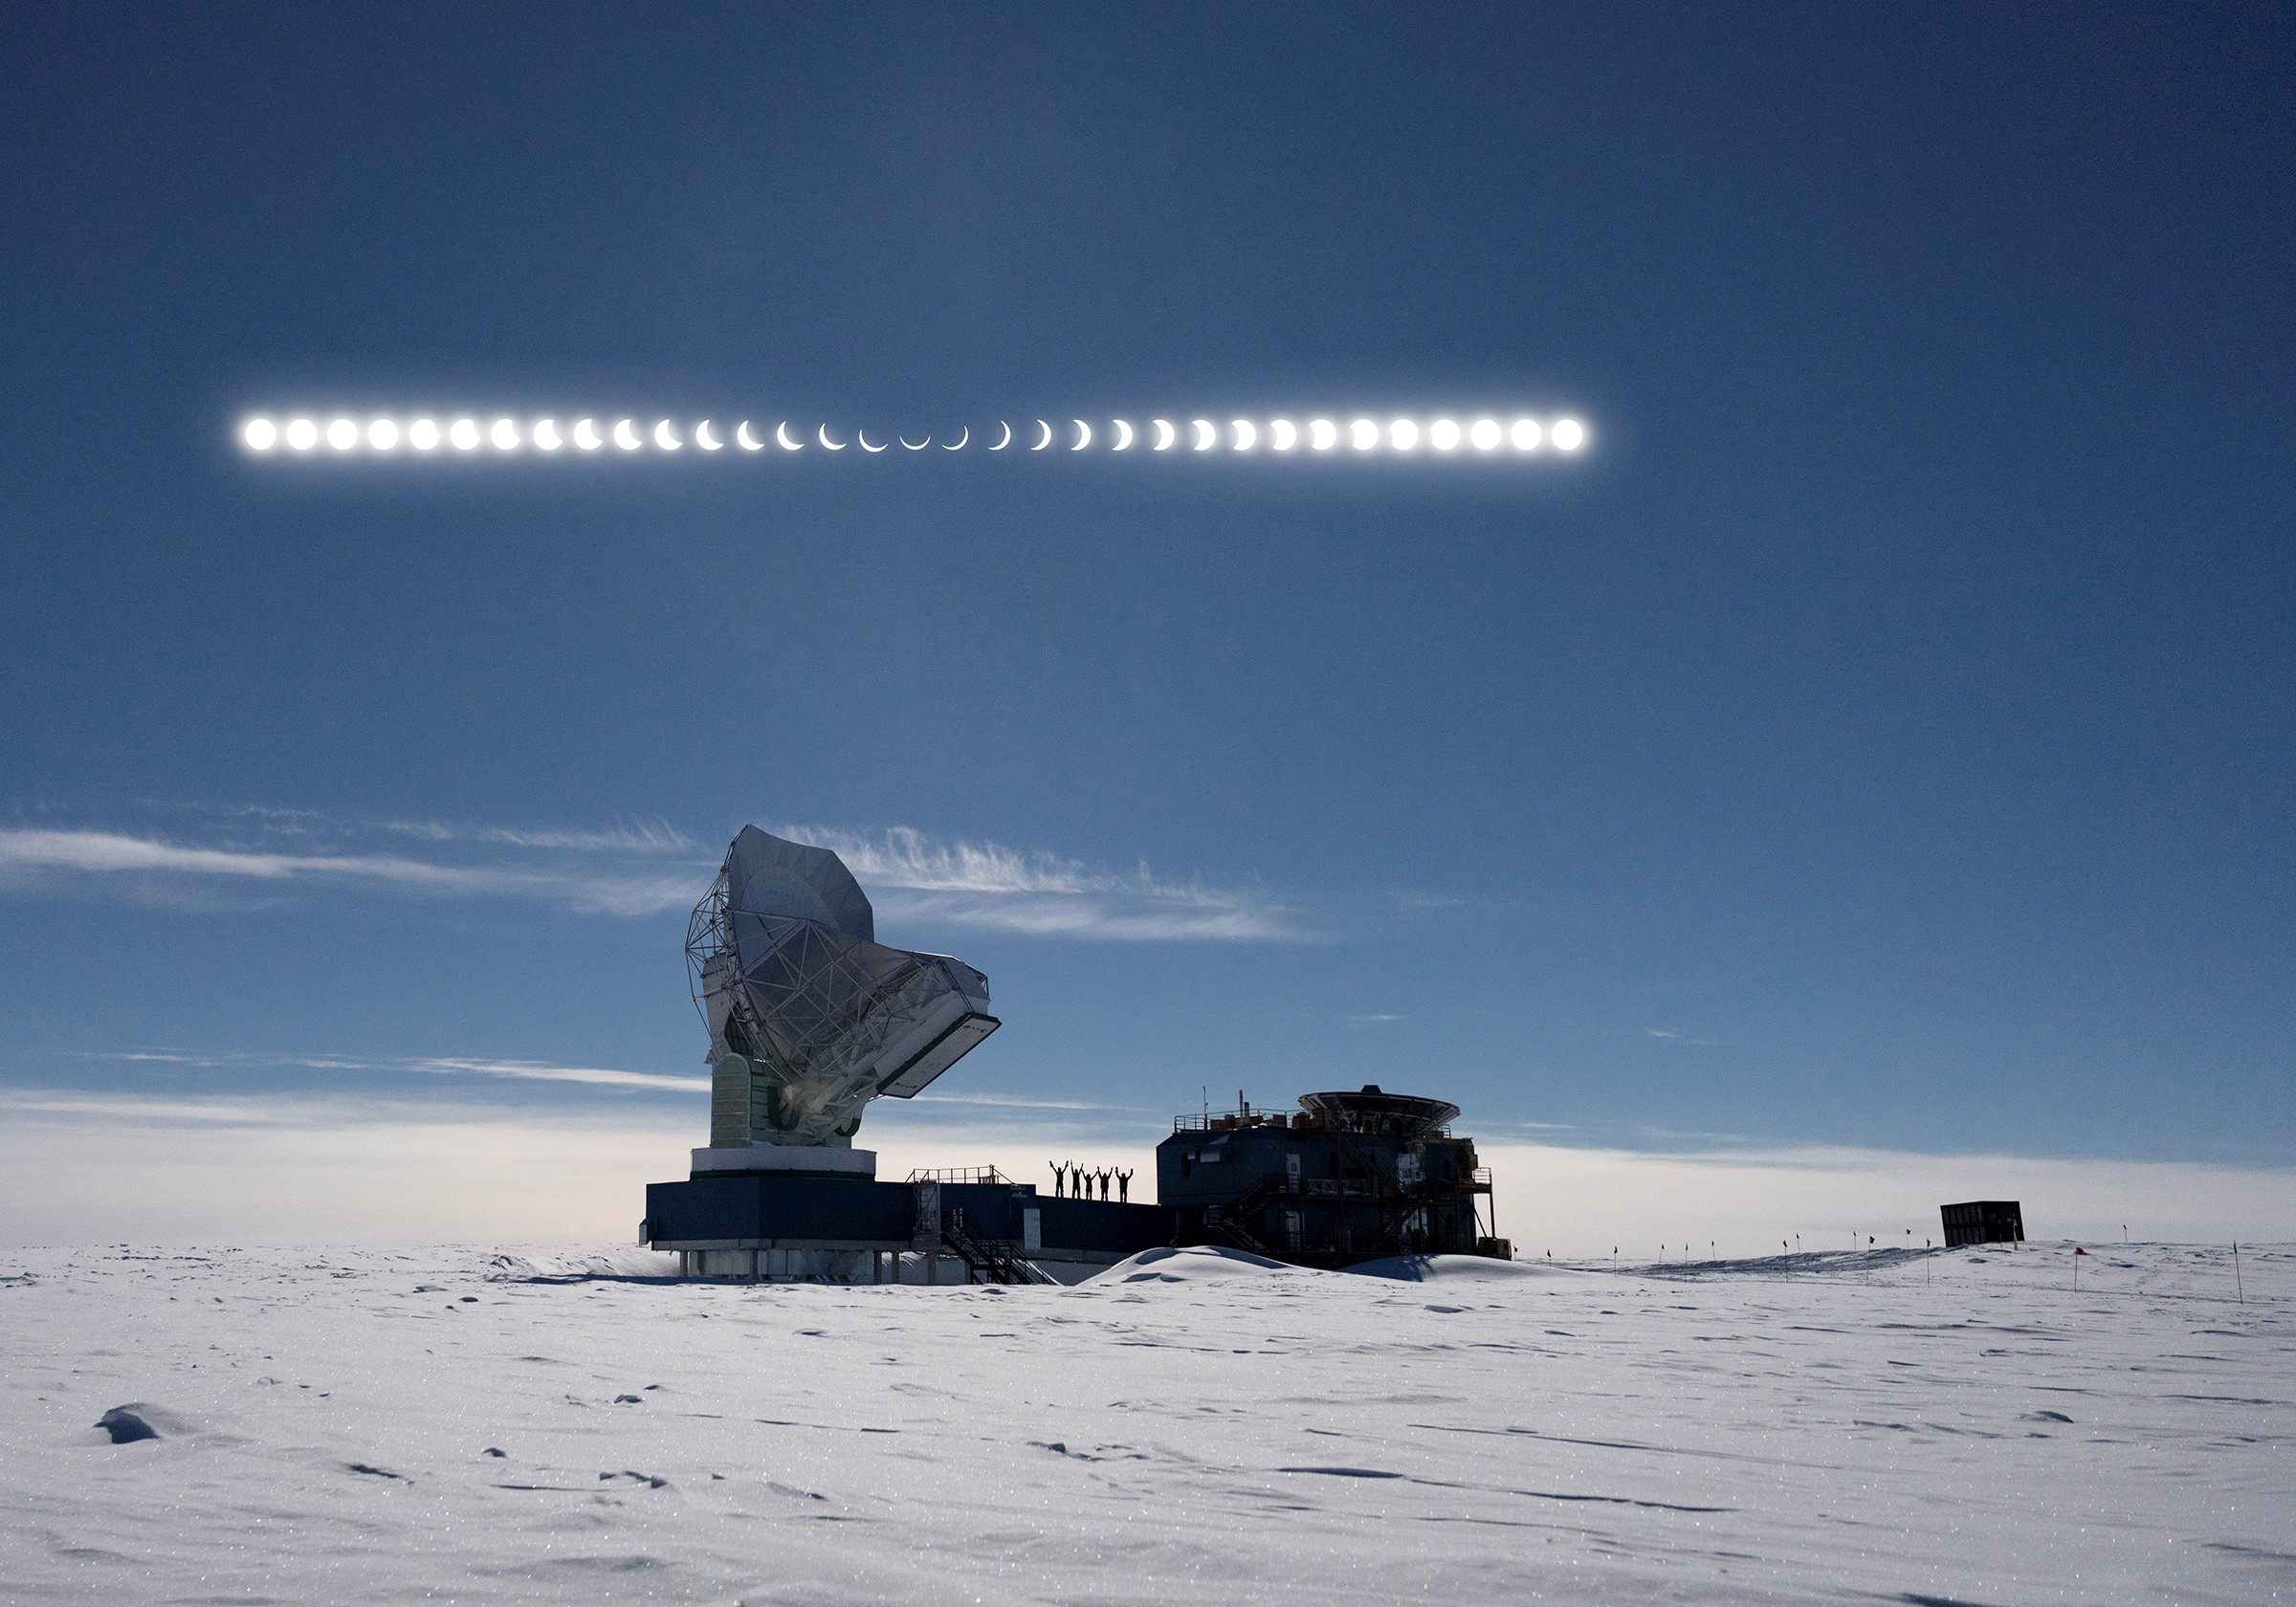 A line of sun images in the sky above a large telescope.